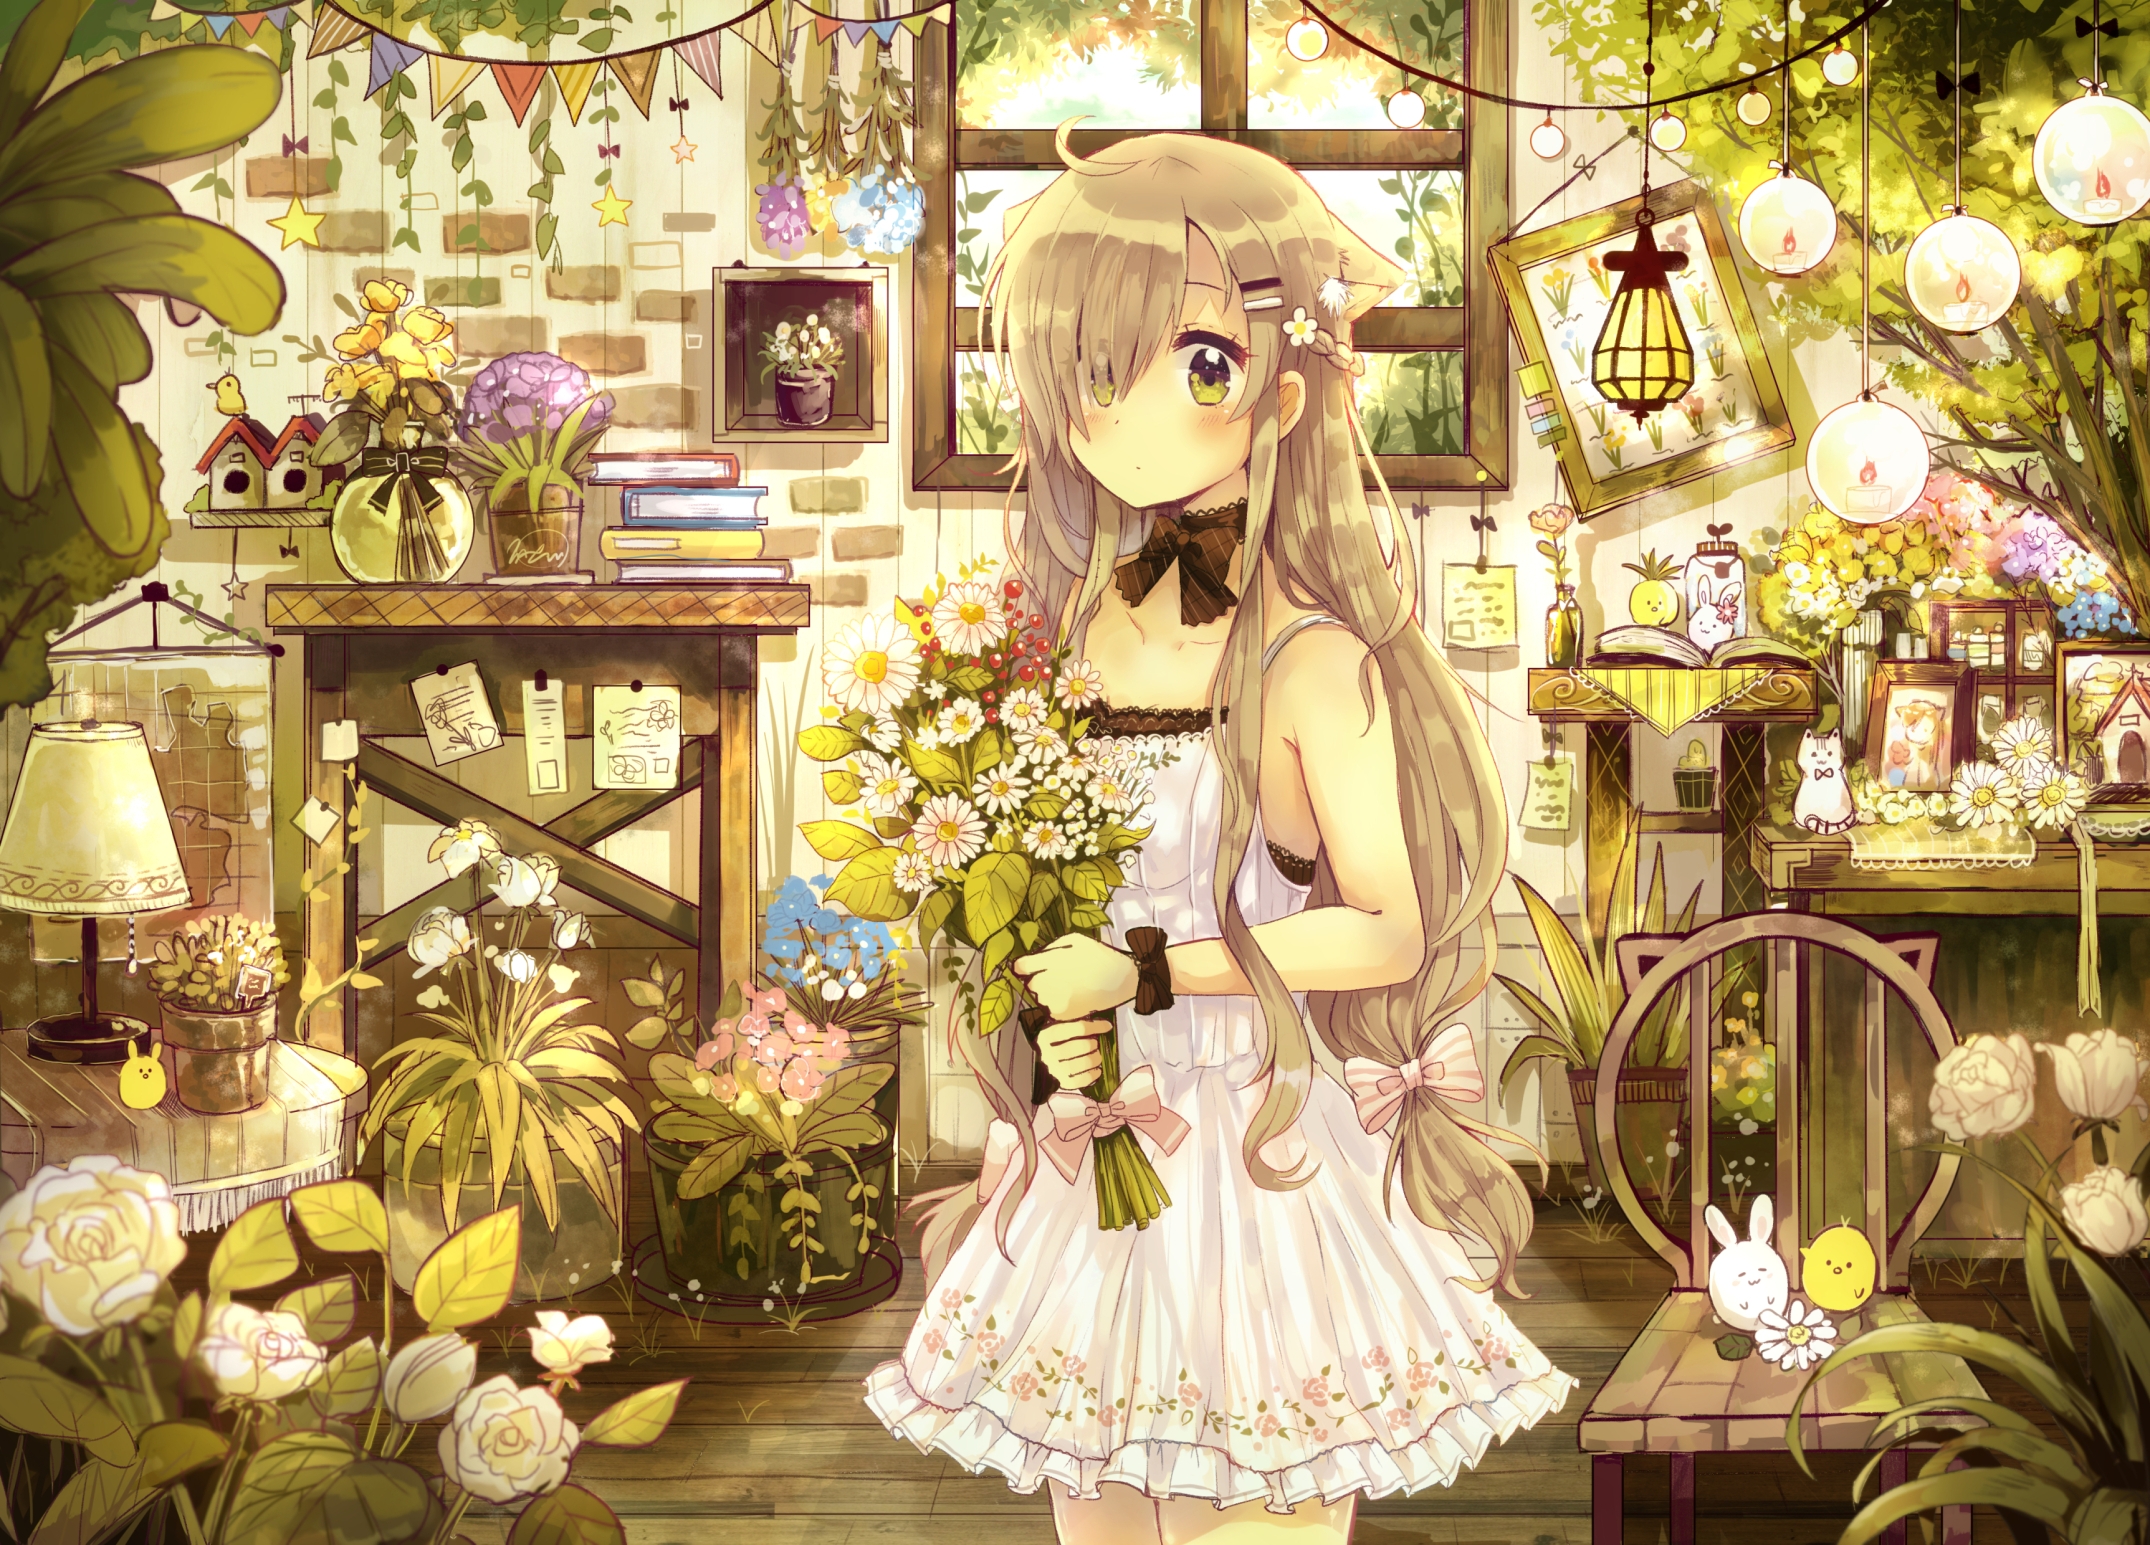 Photo Wallpaper Anime Girl Dress White Flowers Free Pictures On Fonwall 8764